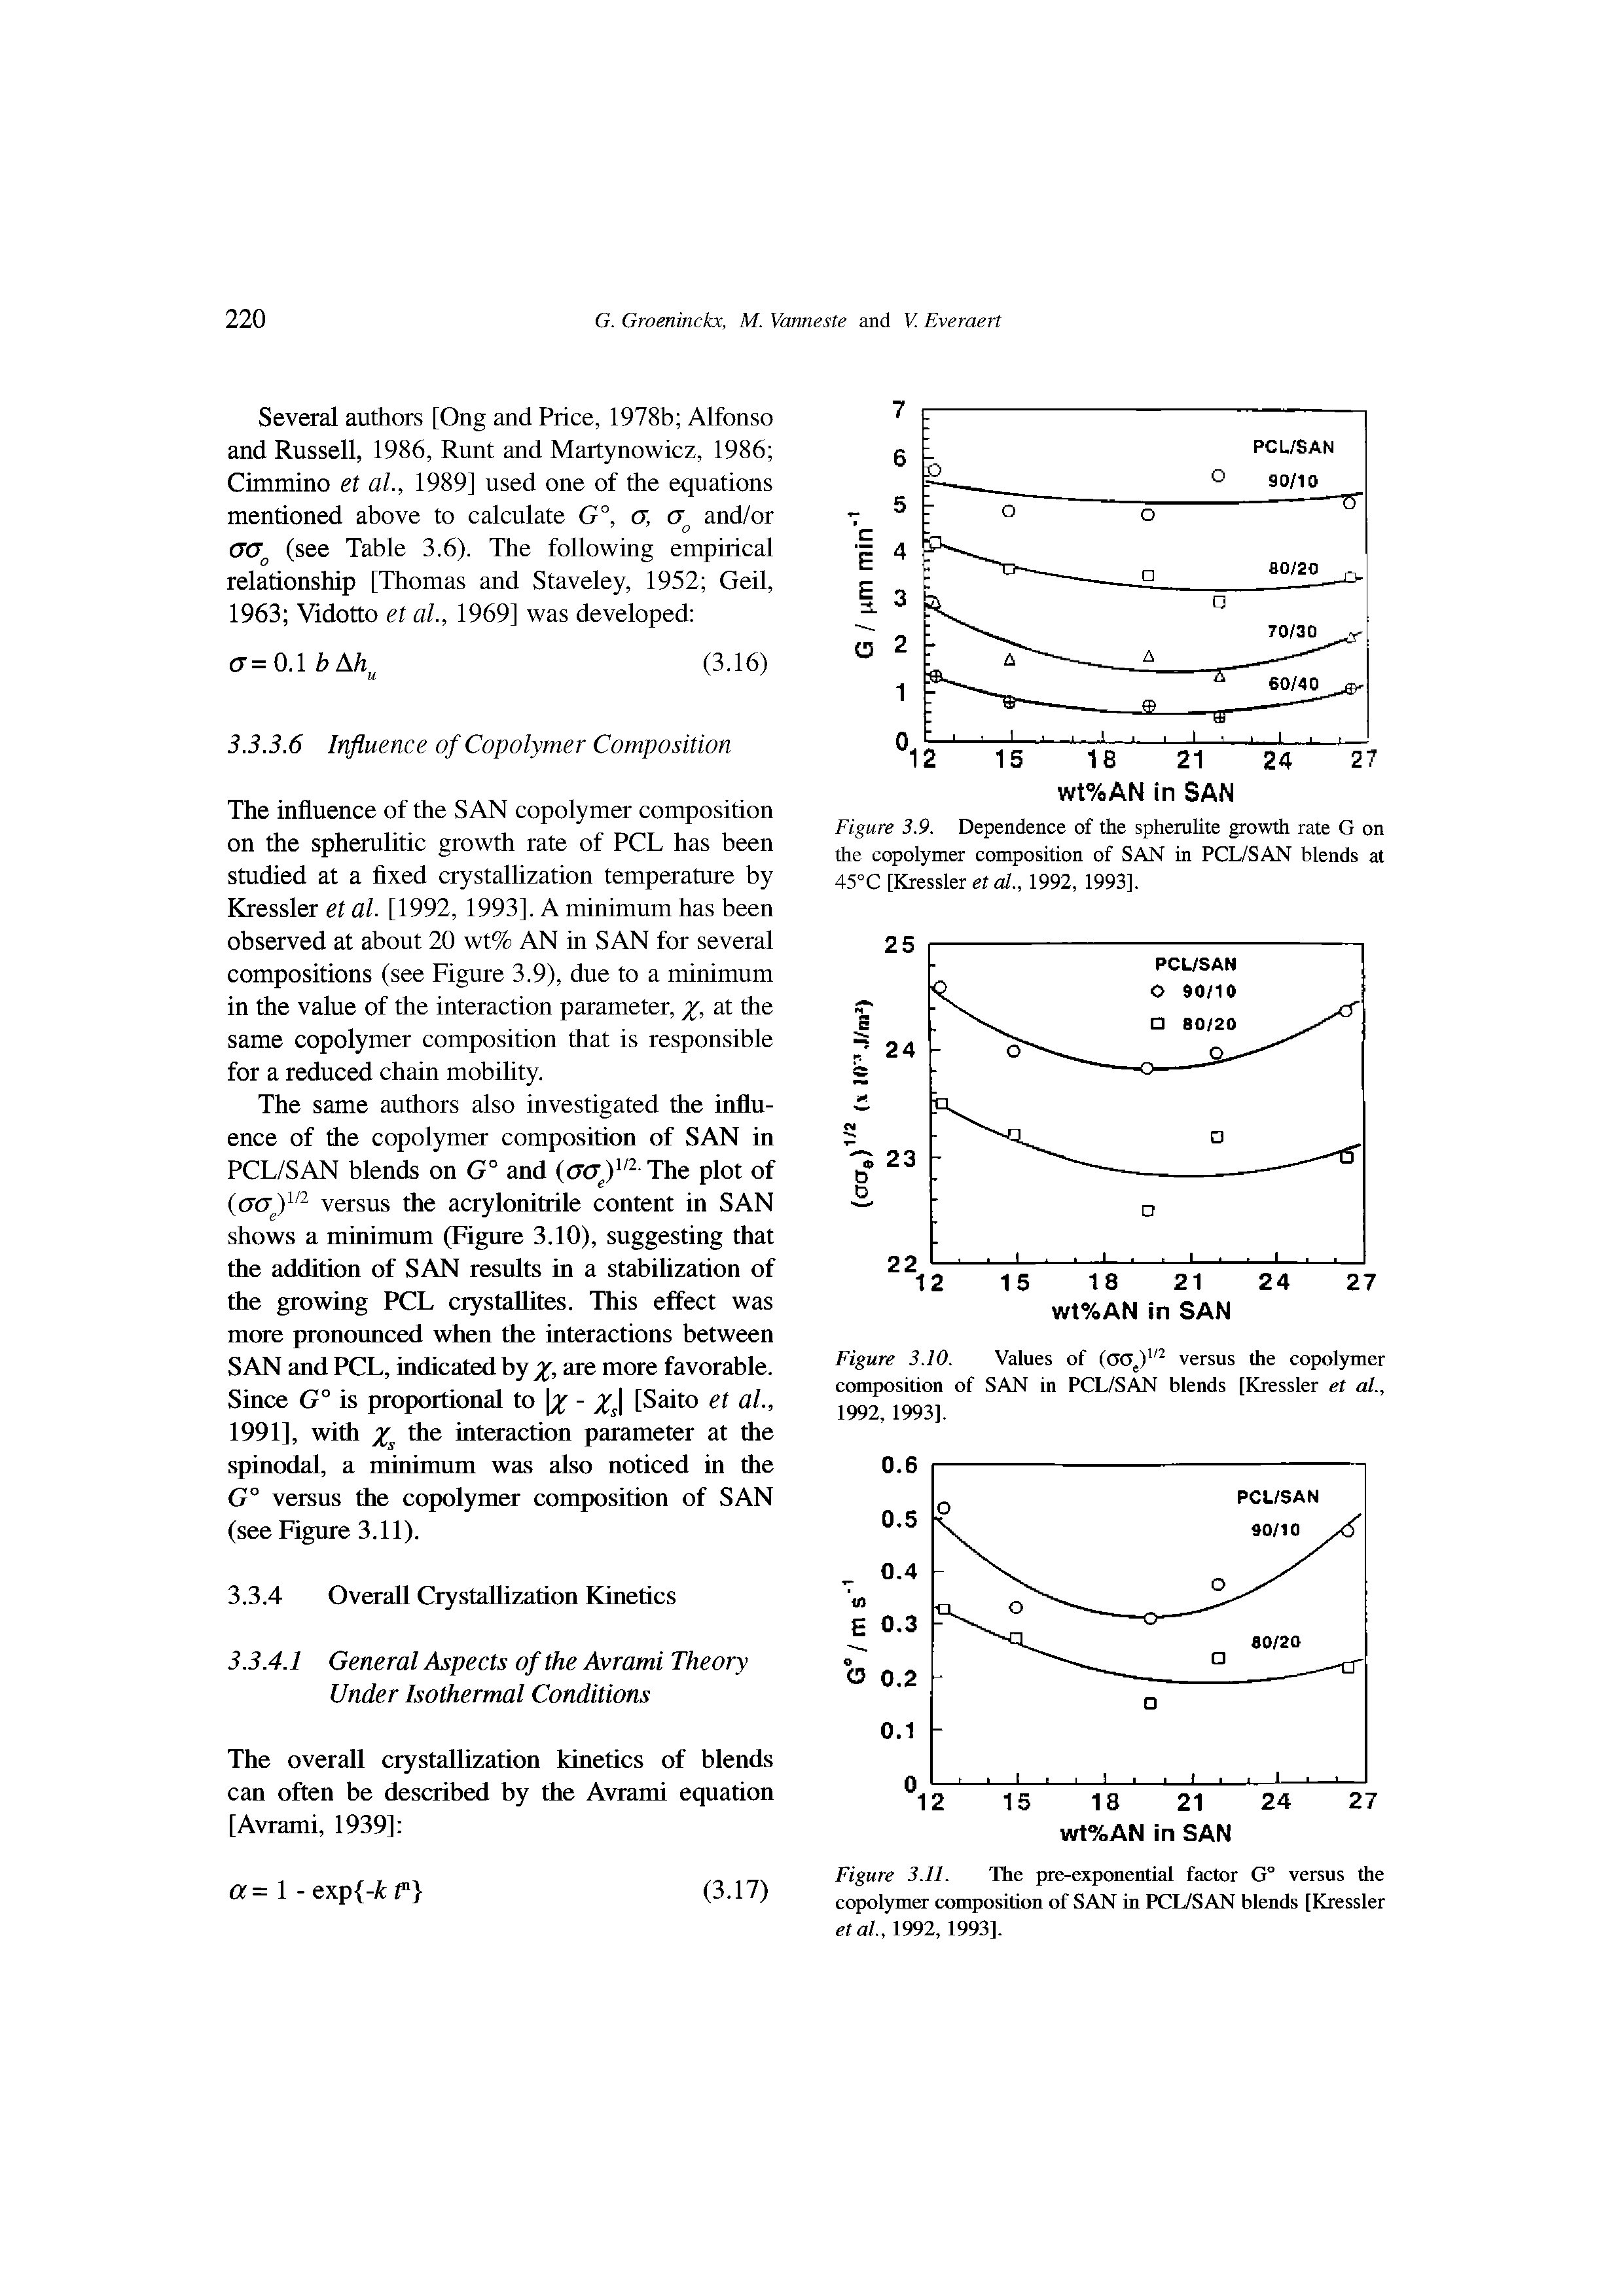 Figure 3.9. Dependence of the spherulite growth rate G on the copolymer composition of SAN in PCL/SAN blends at 45°C [Kressler et a/., 1992, 1993].